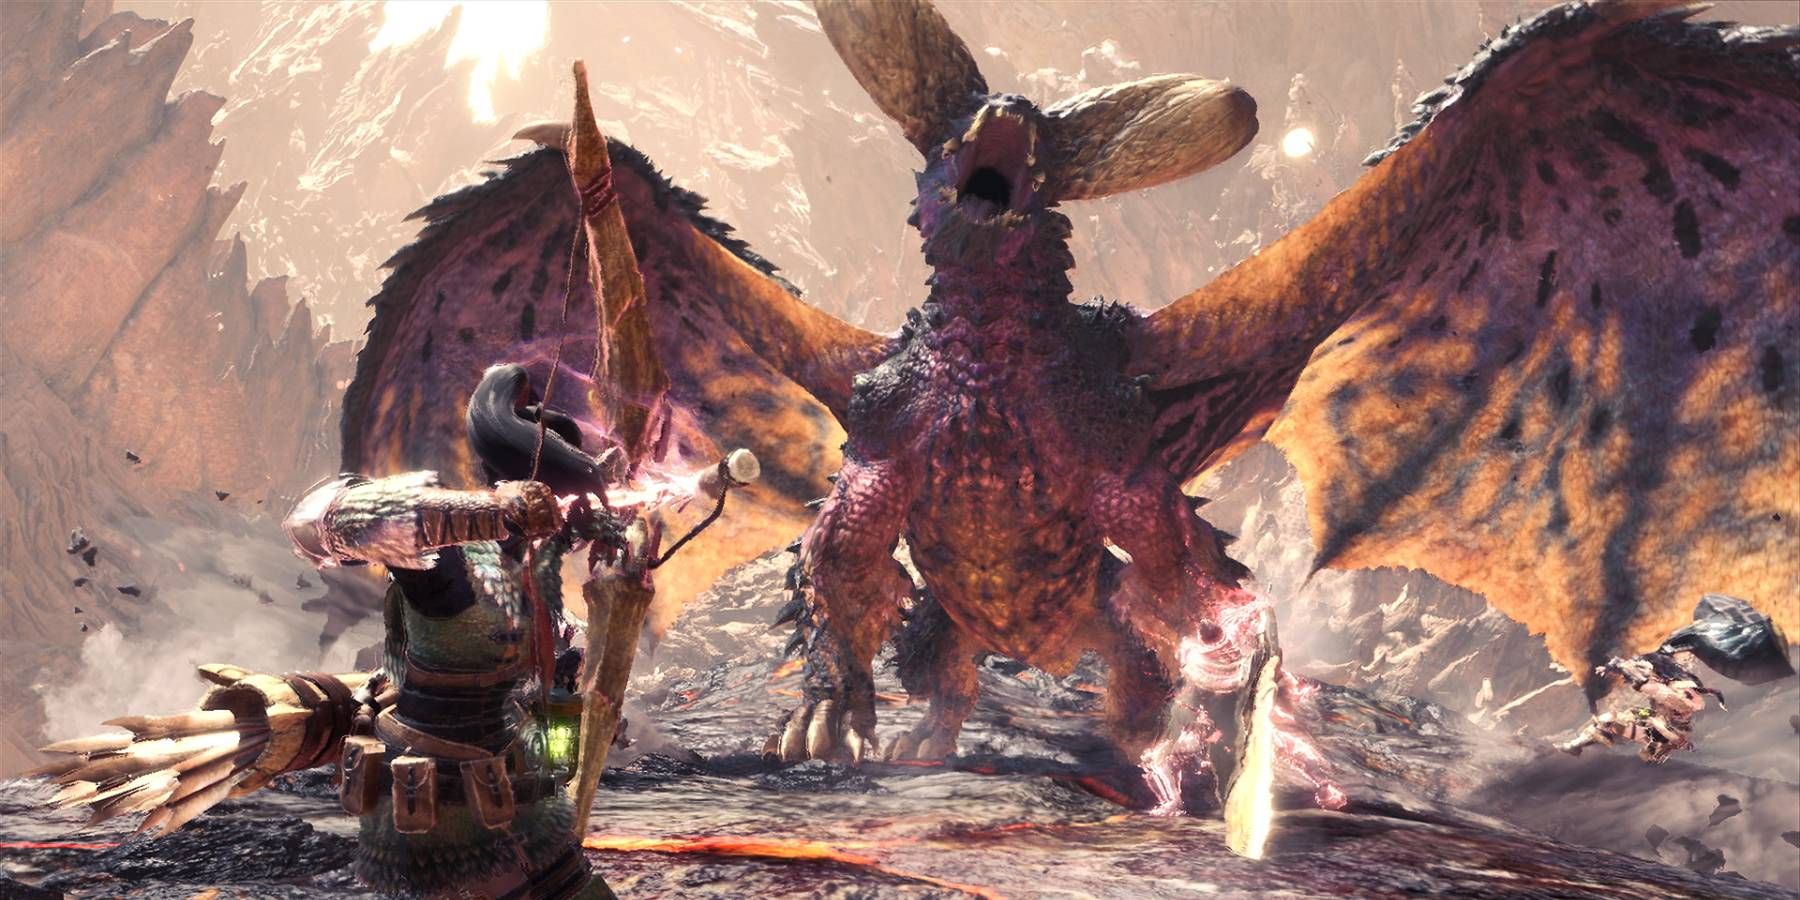 Players hunting a Nergigante in Monster Hunter World